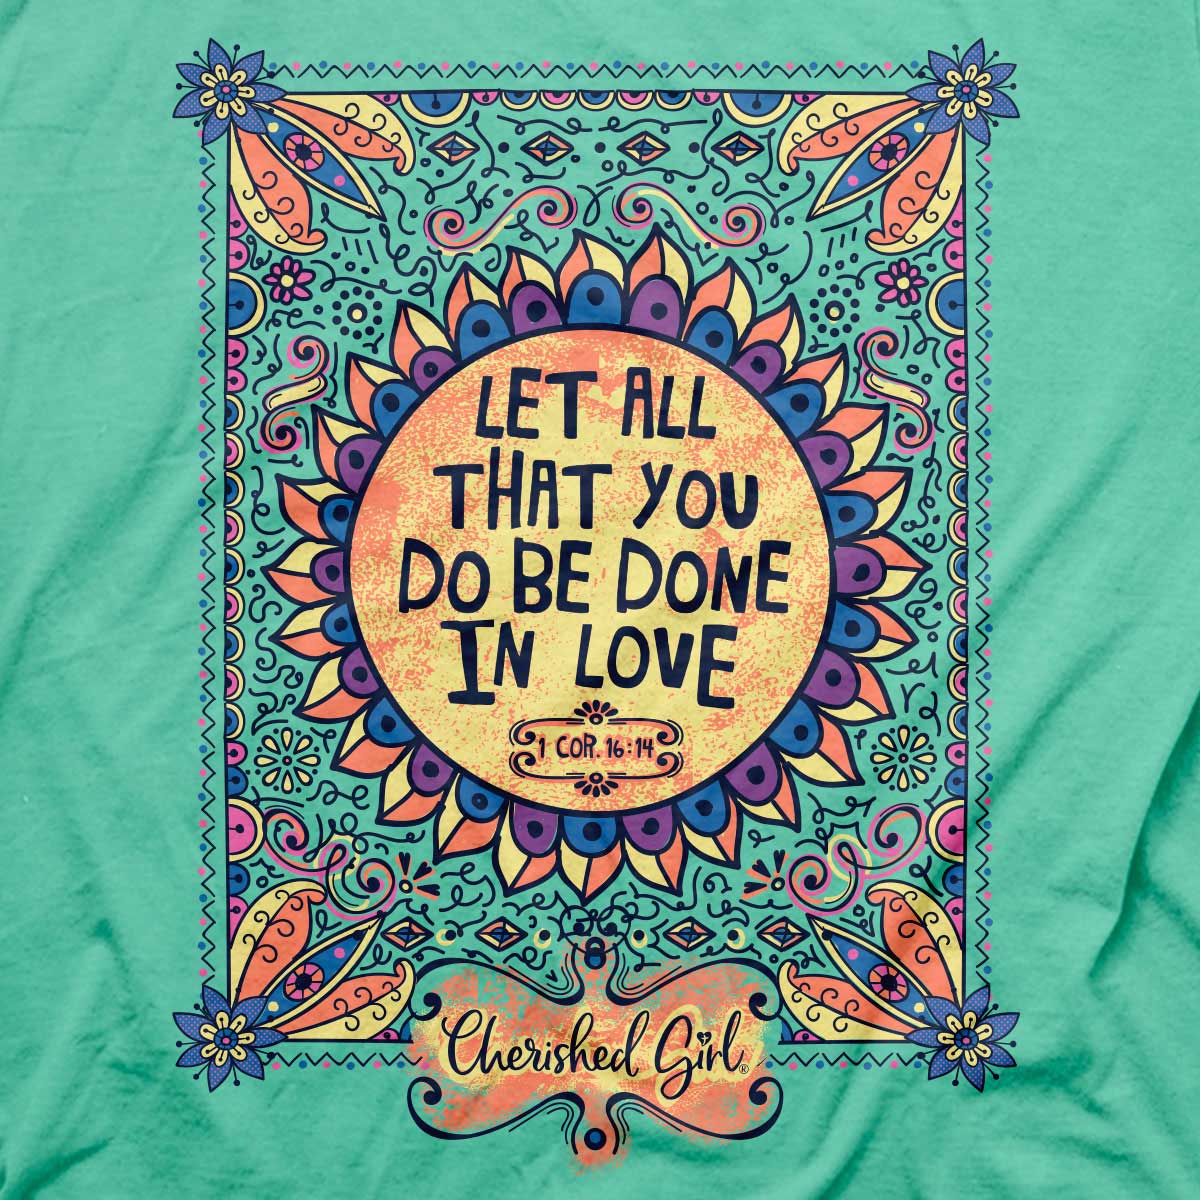 Cherished Girl Womens T-Shirt Let All That You Do Be Done In Love